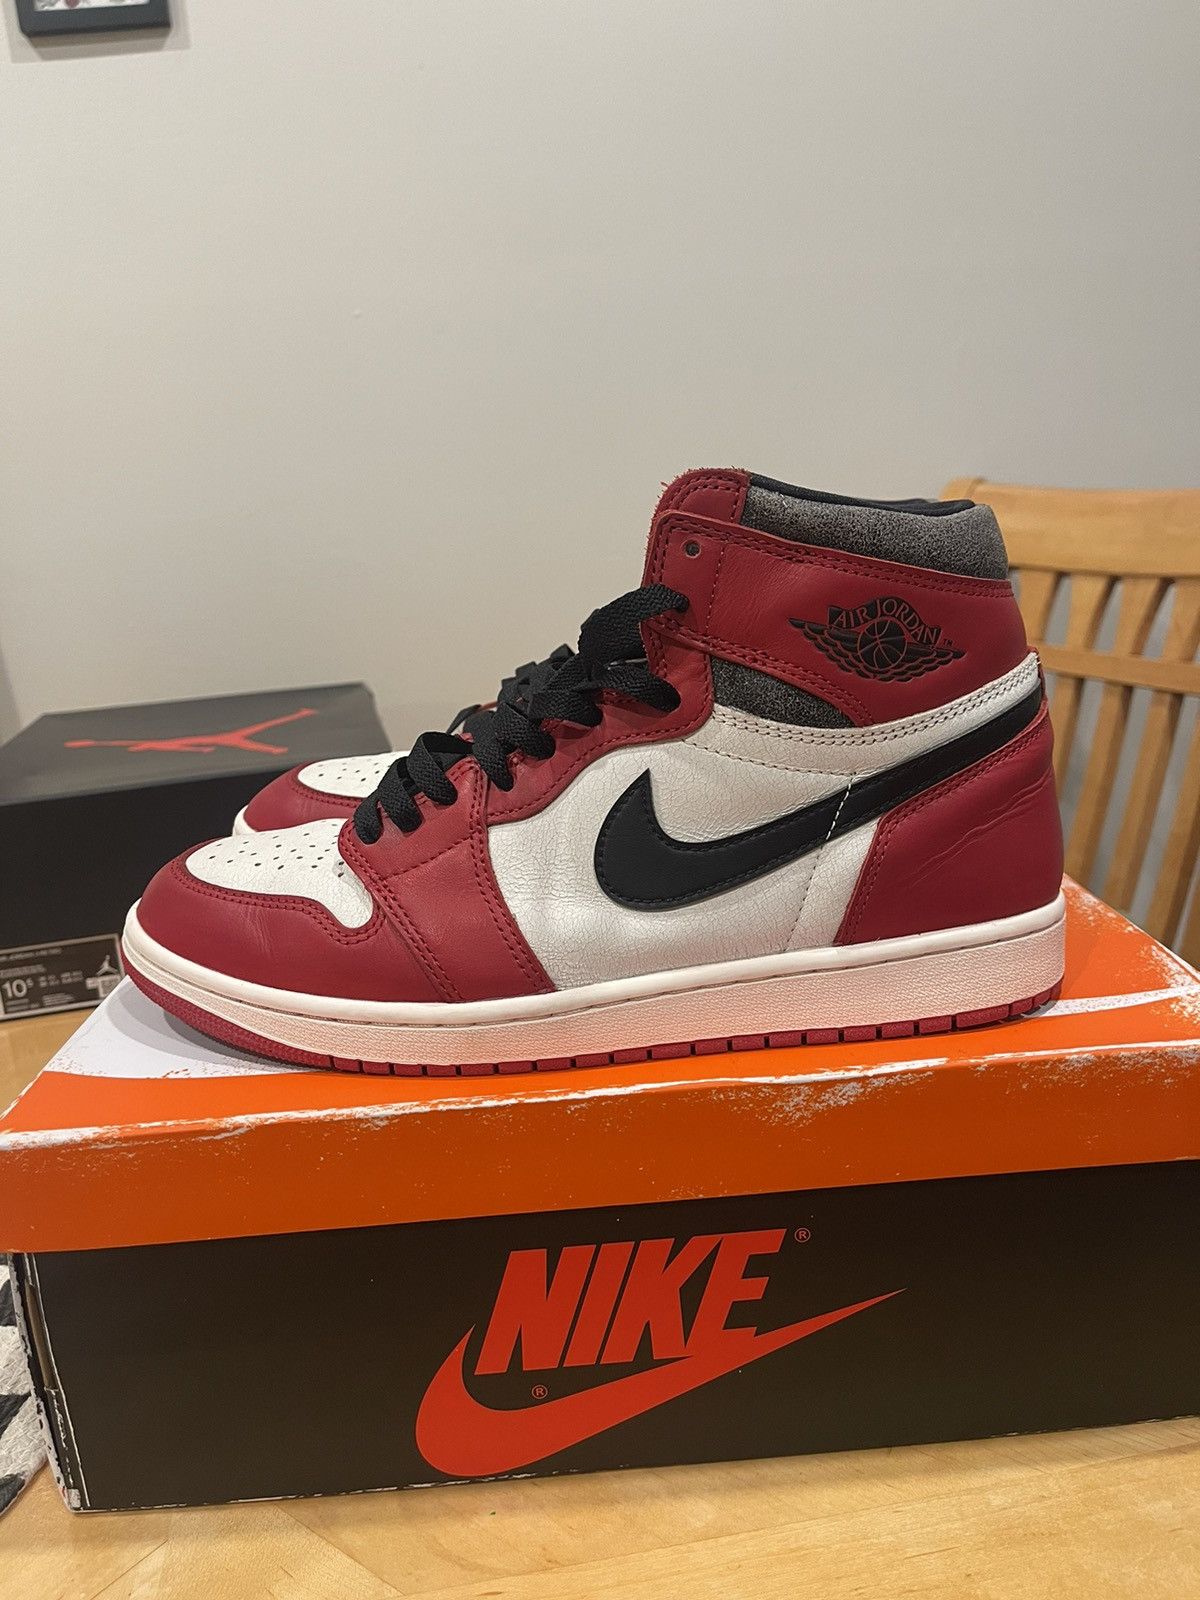 Nike Air Jordan 1 - Chicago “Lost & Found” Size US 10.5 / EU 43-44 - 2 Preview